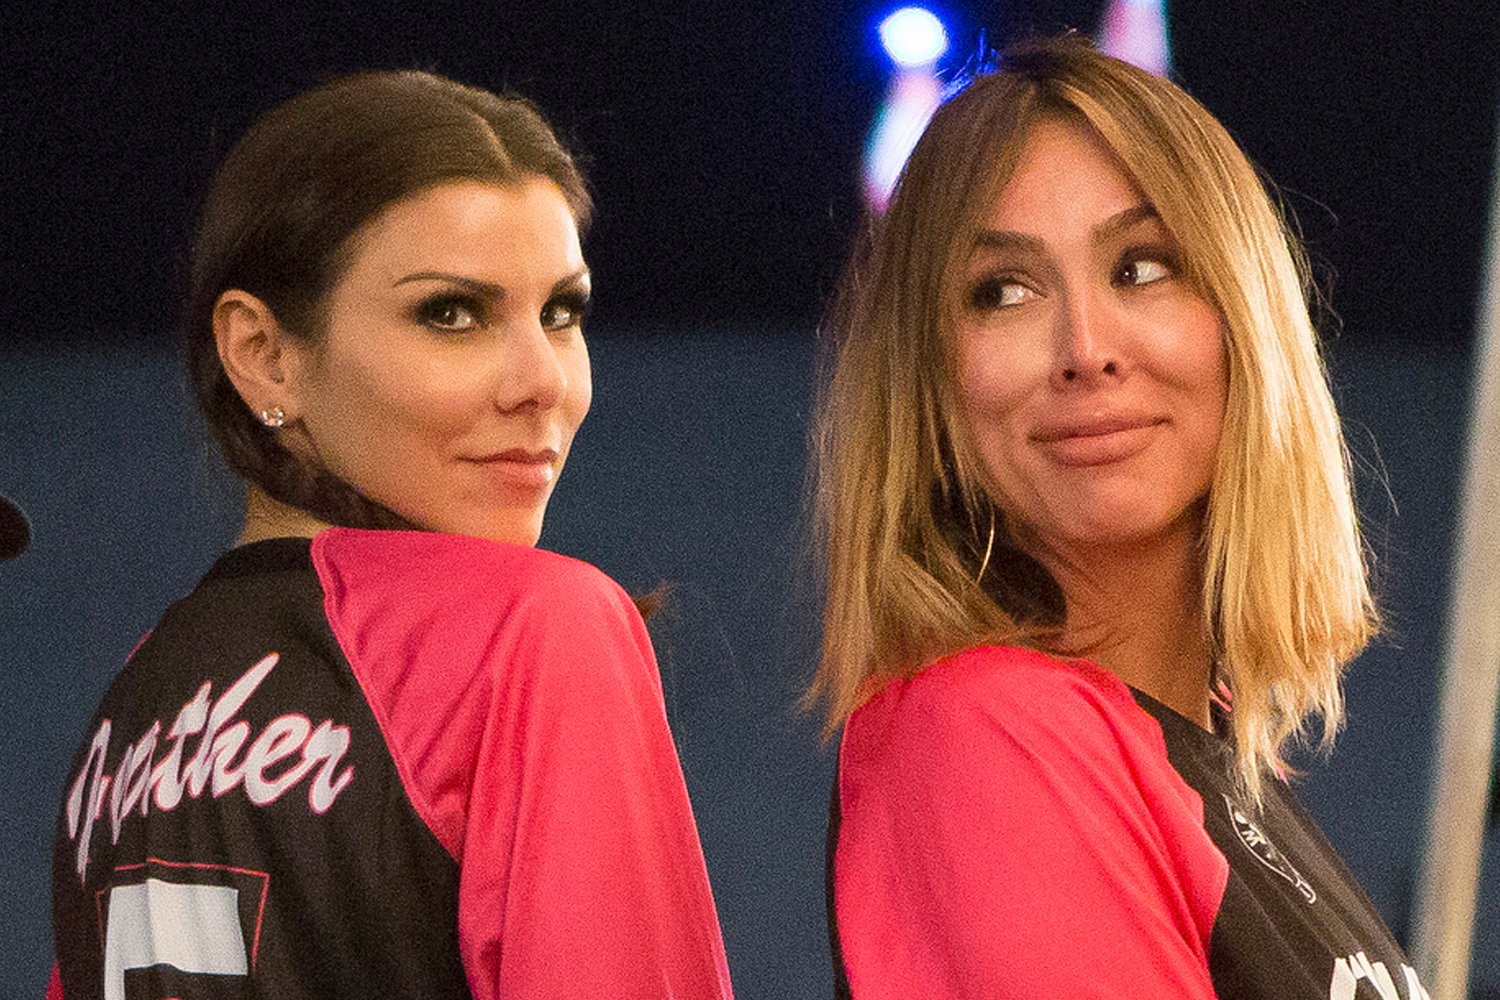 ‘RHOC’: Heather Dubrow Reveals Truth About ‘Deal’ Conditioning Return Only If Kelly Dodd Was Fired